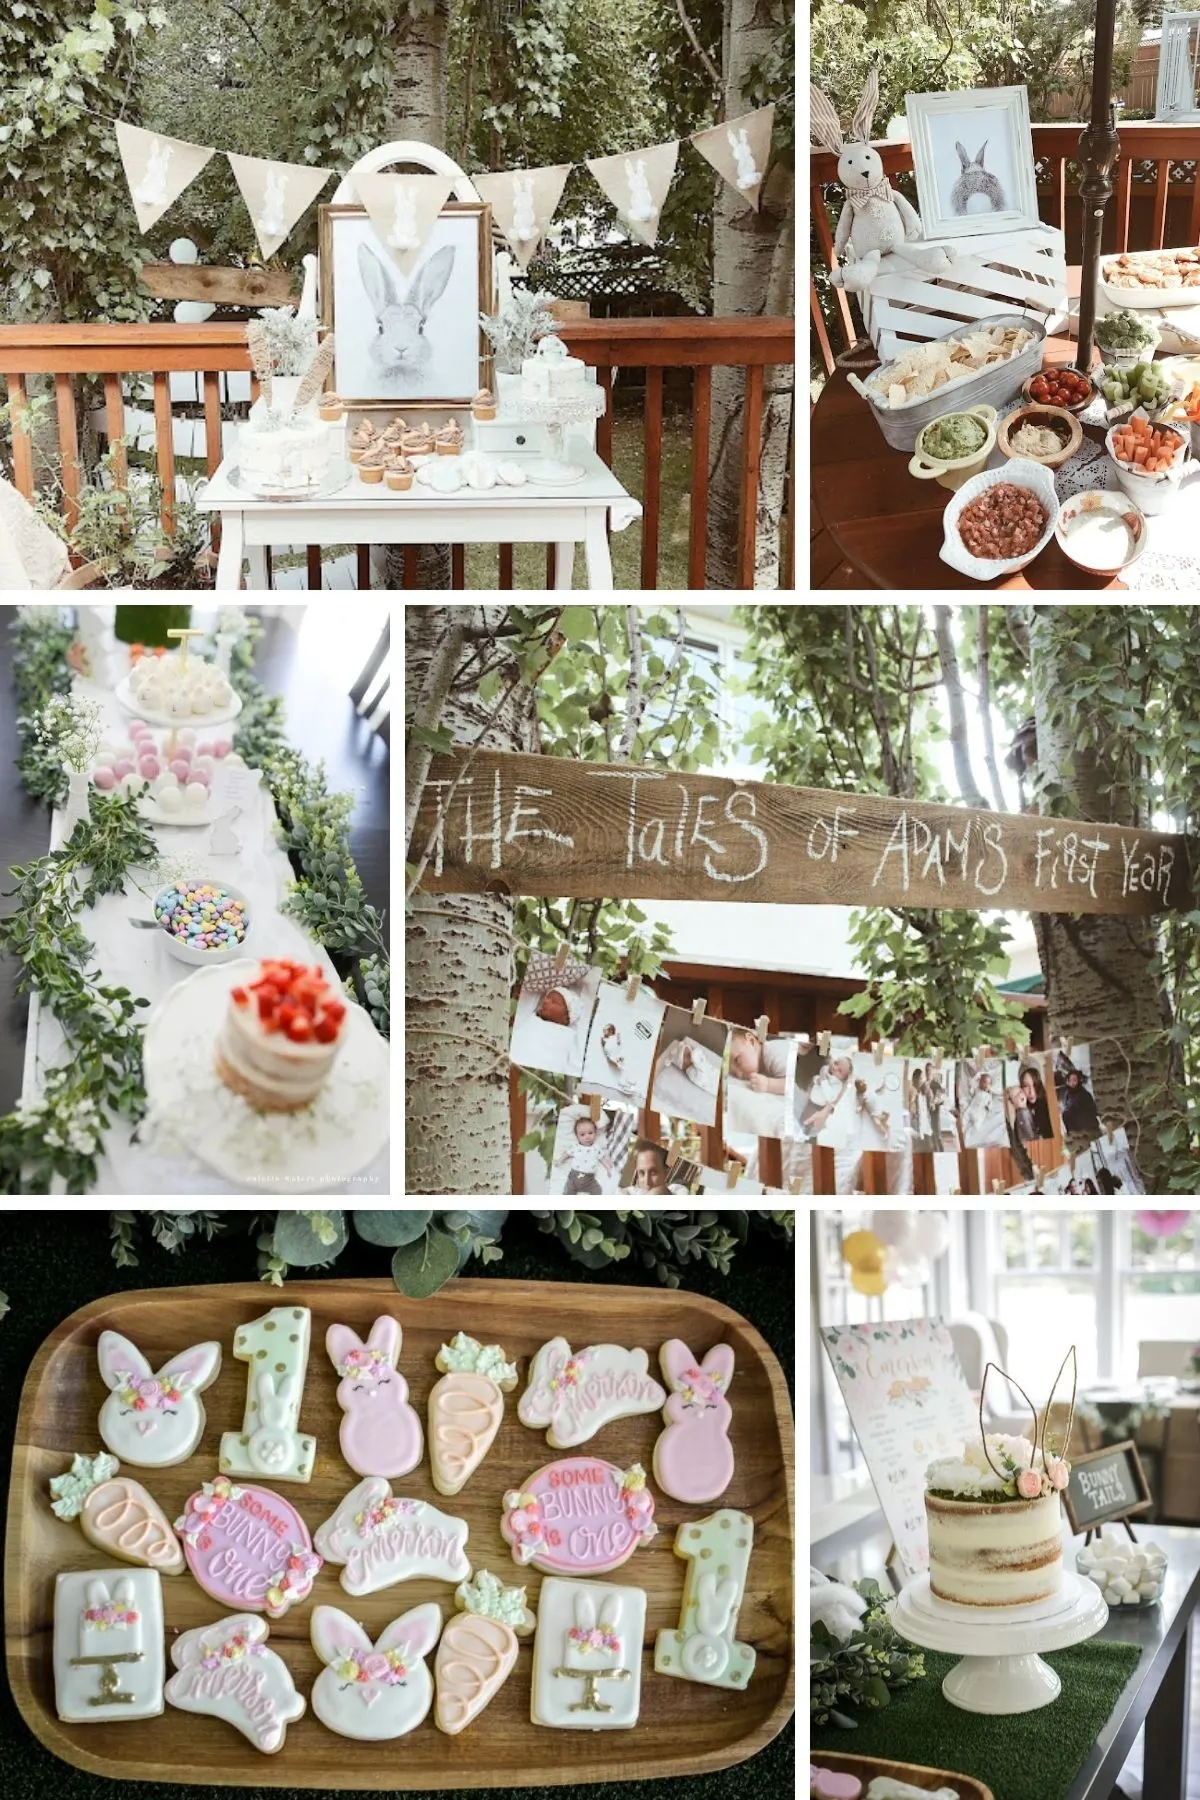 Photo collage from some bunny is one party theme including cookies, cake, and decorations.